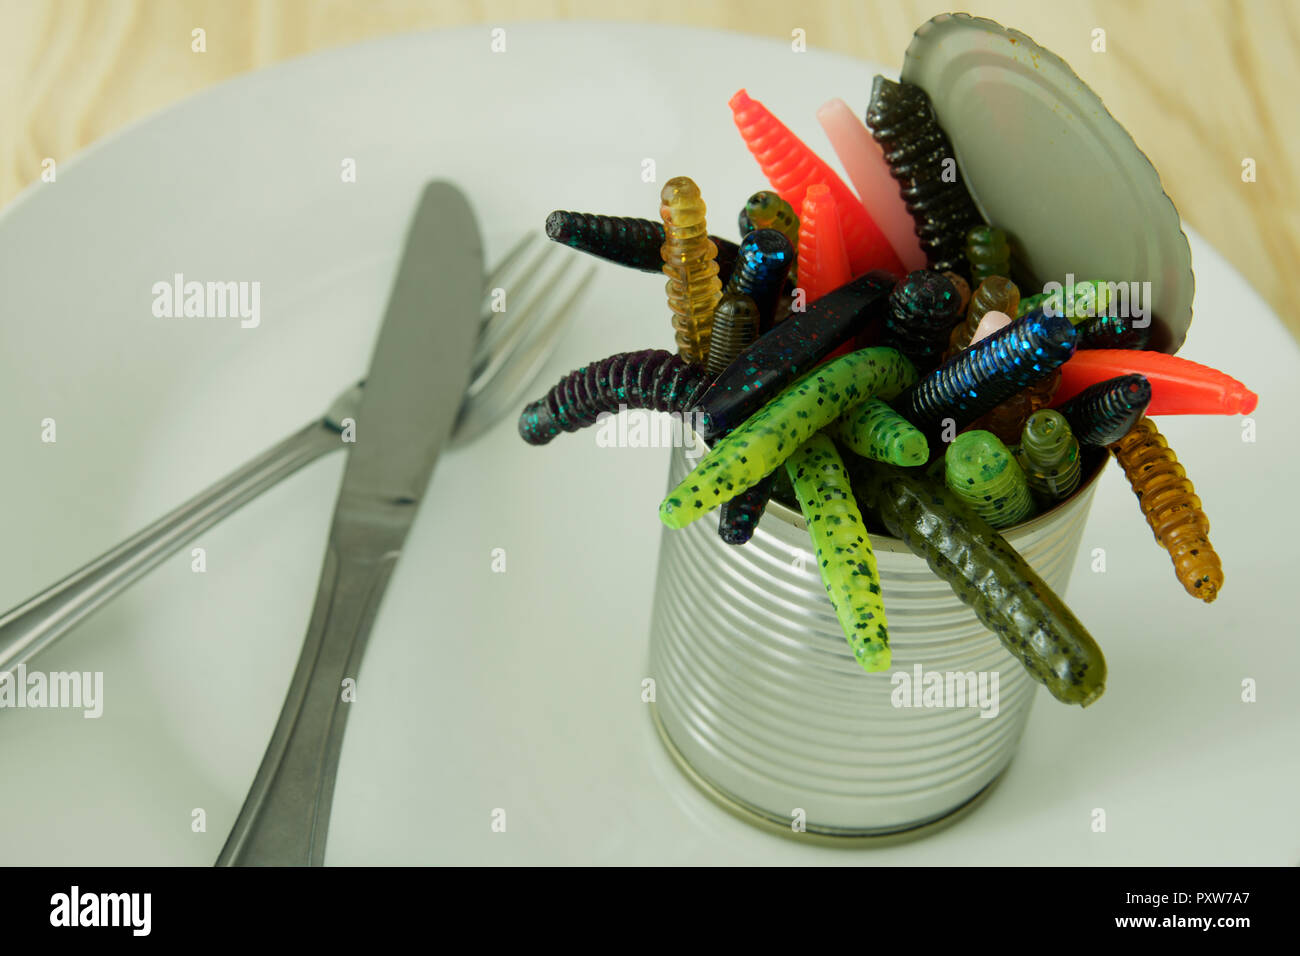 Close-up, detail, can of worms, food plate, knife, fork, abstract, background, cans, plastic Stock Photo